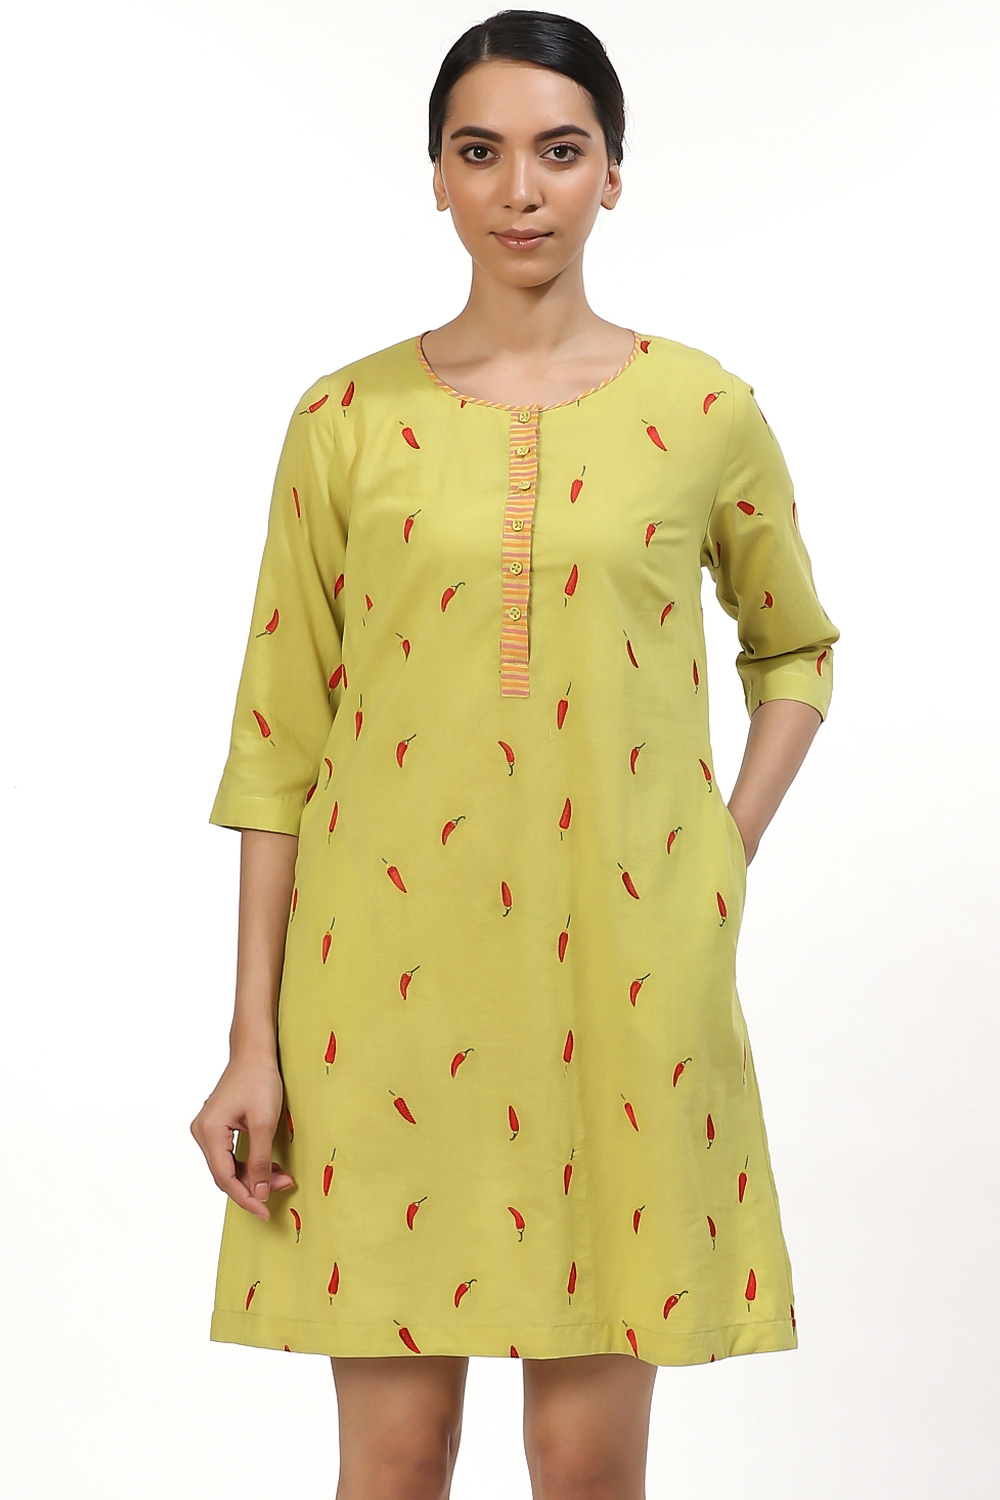 ABRAHAM AND THAKORE | Lime Red Chilli Dress